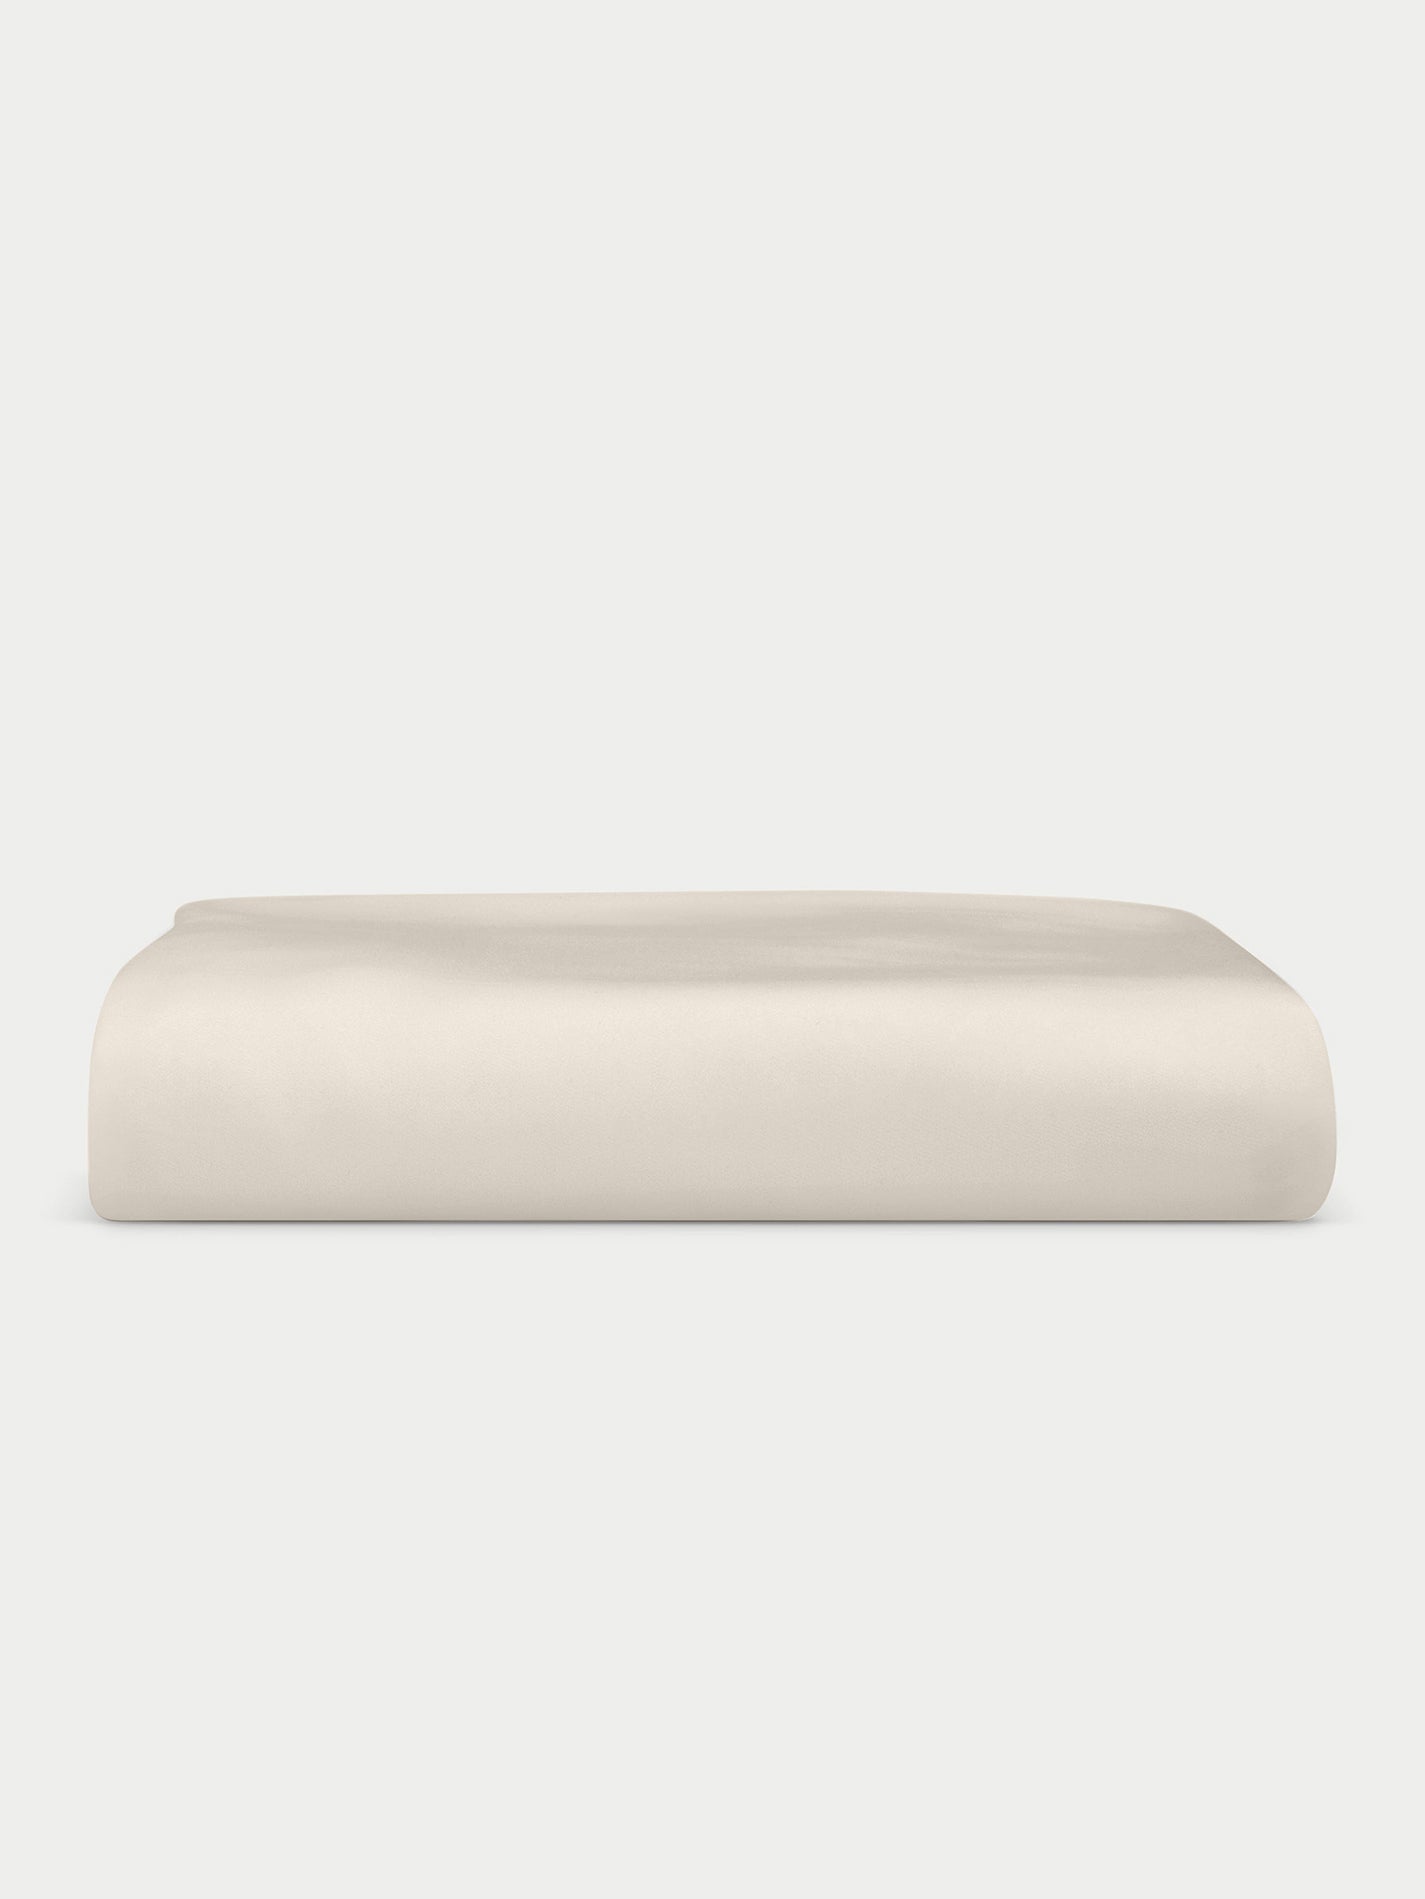 Folded fitted birch sheet with white background |Color:Birch